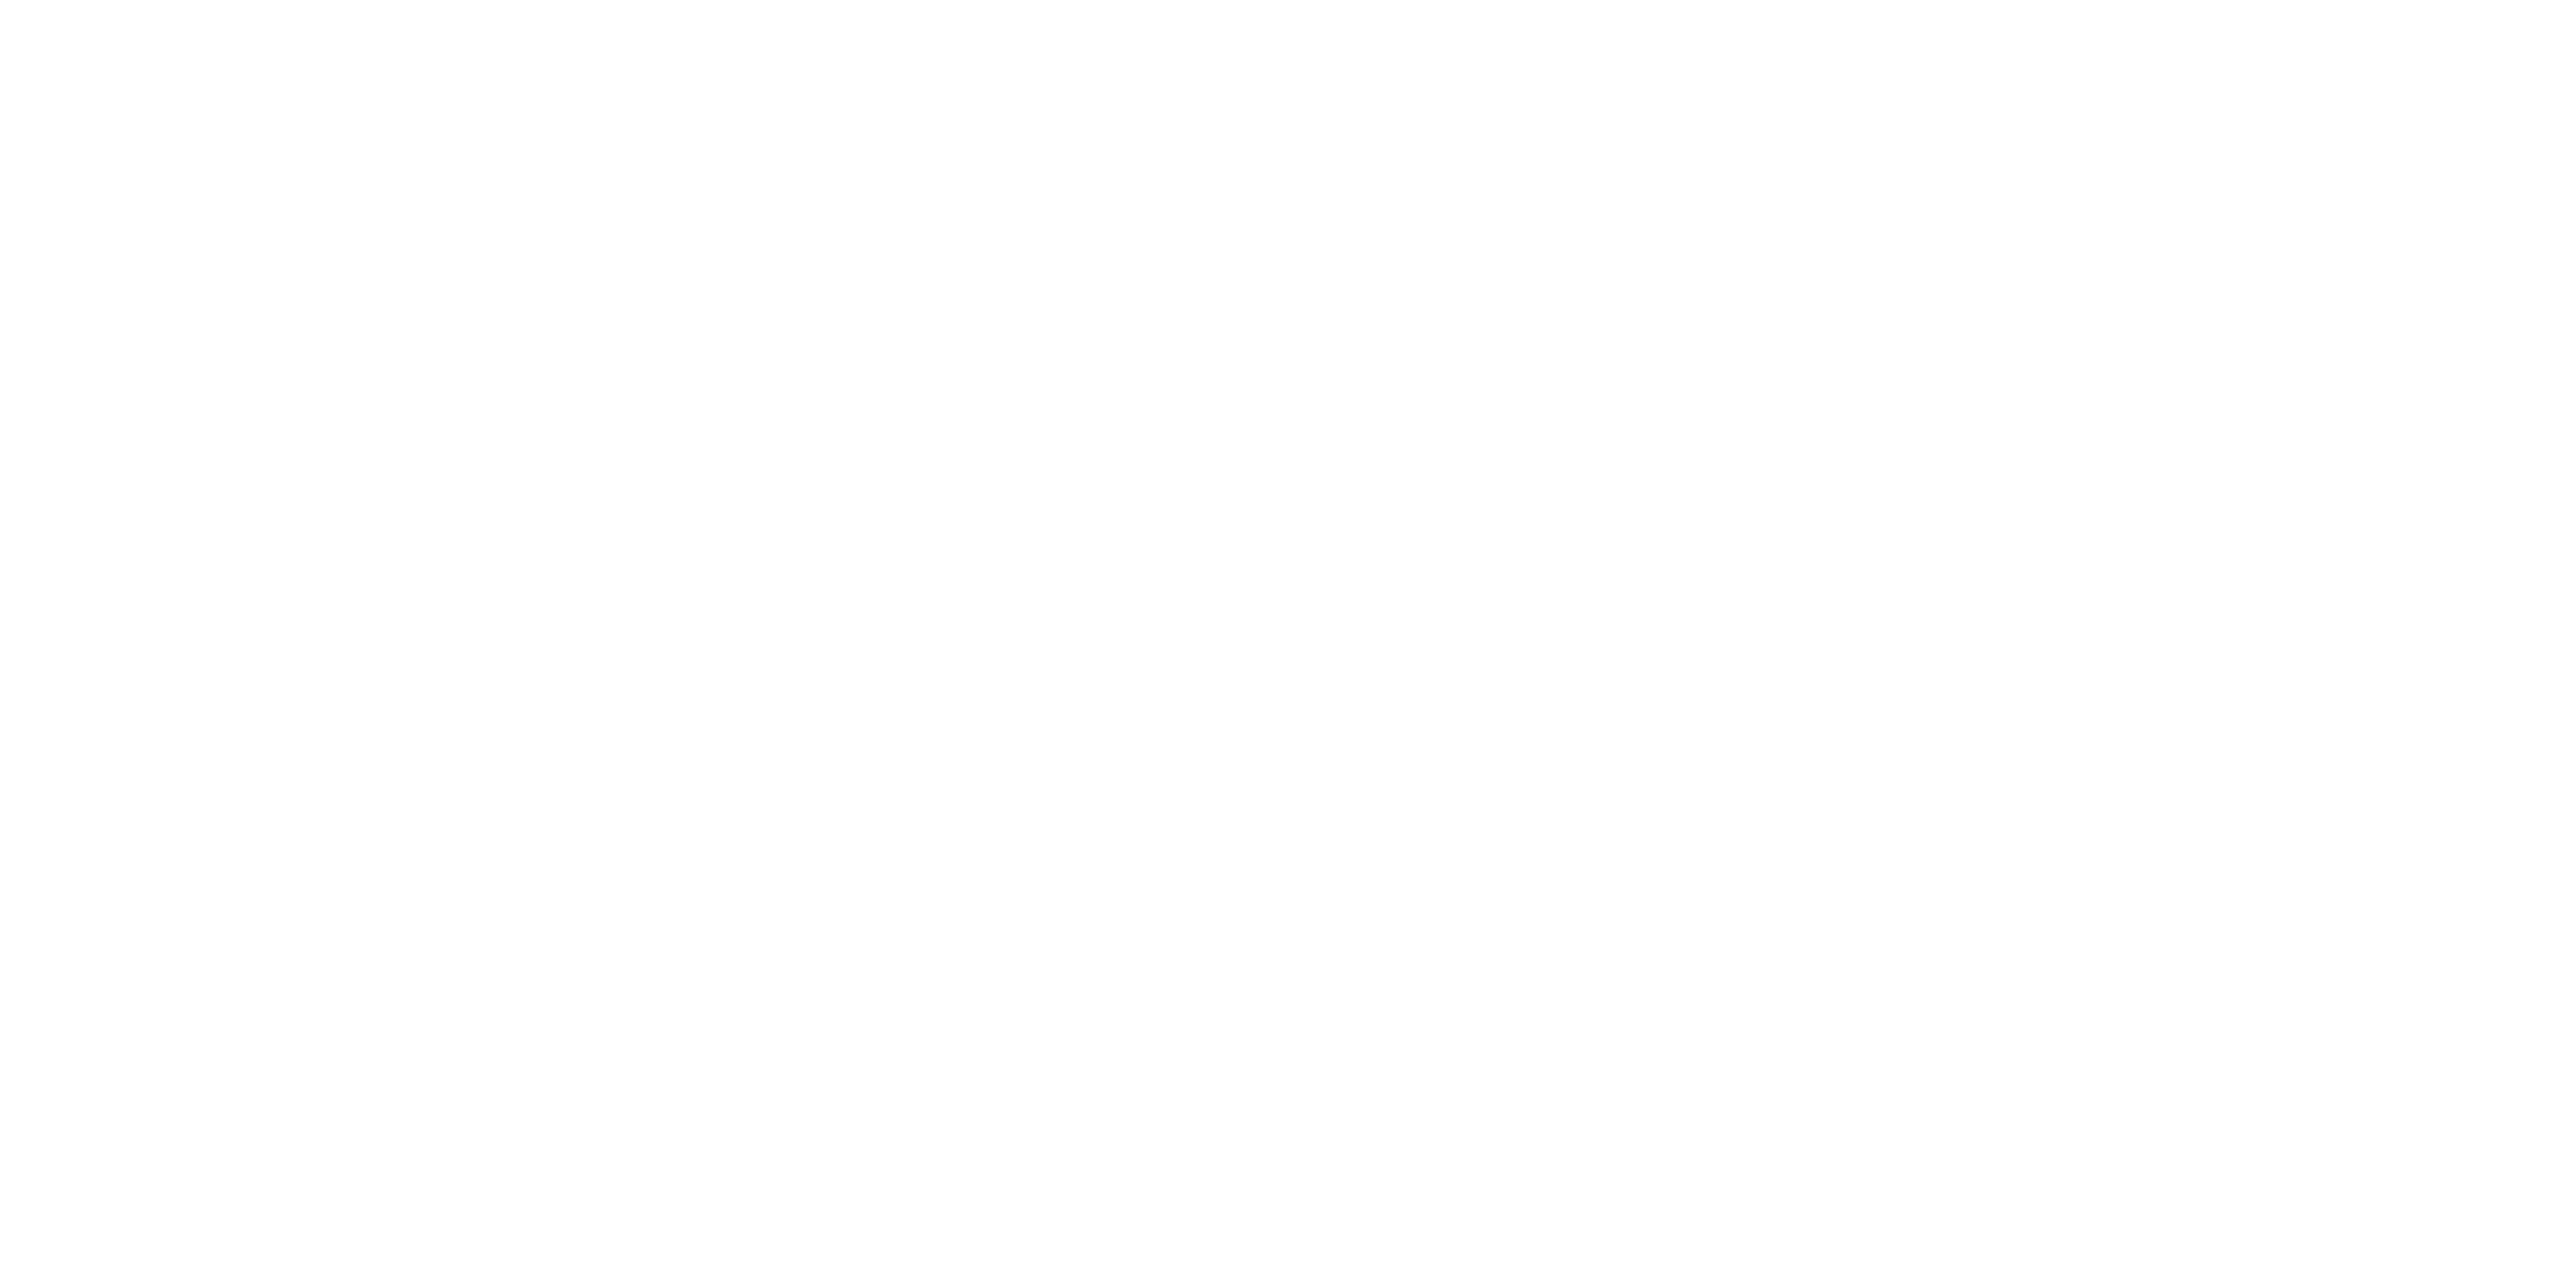 The Corporate Minister